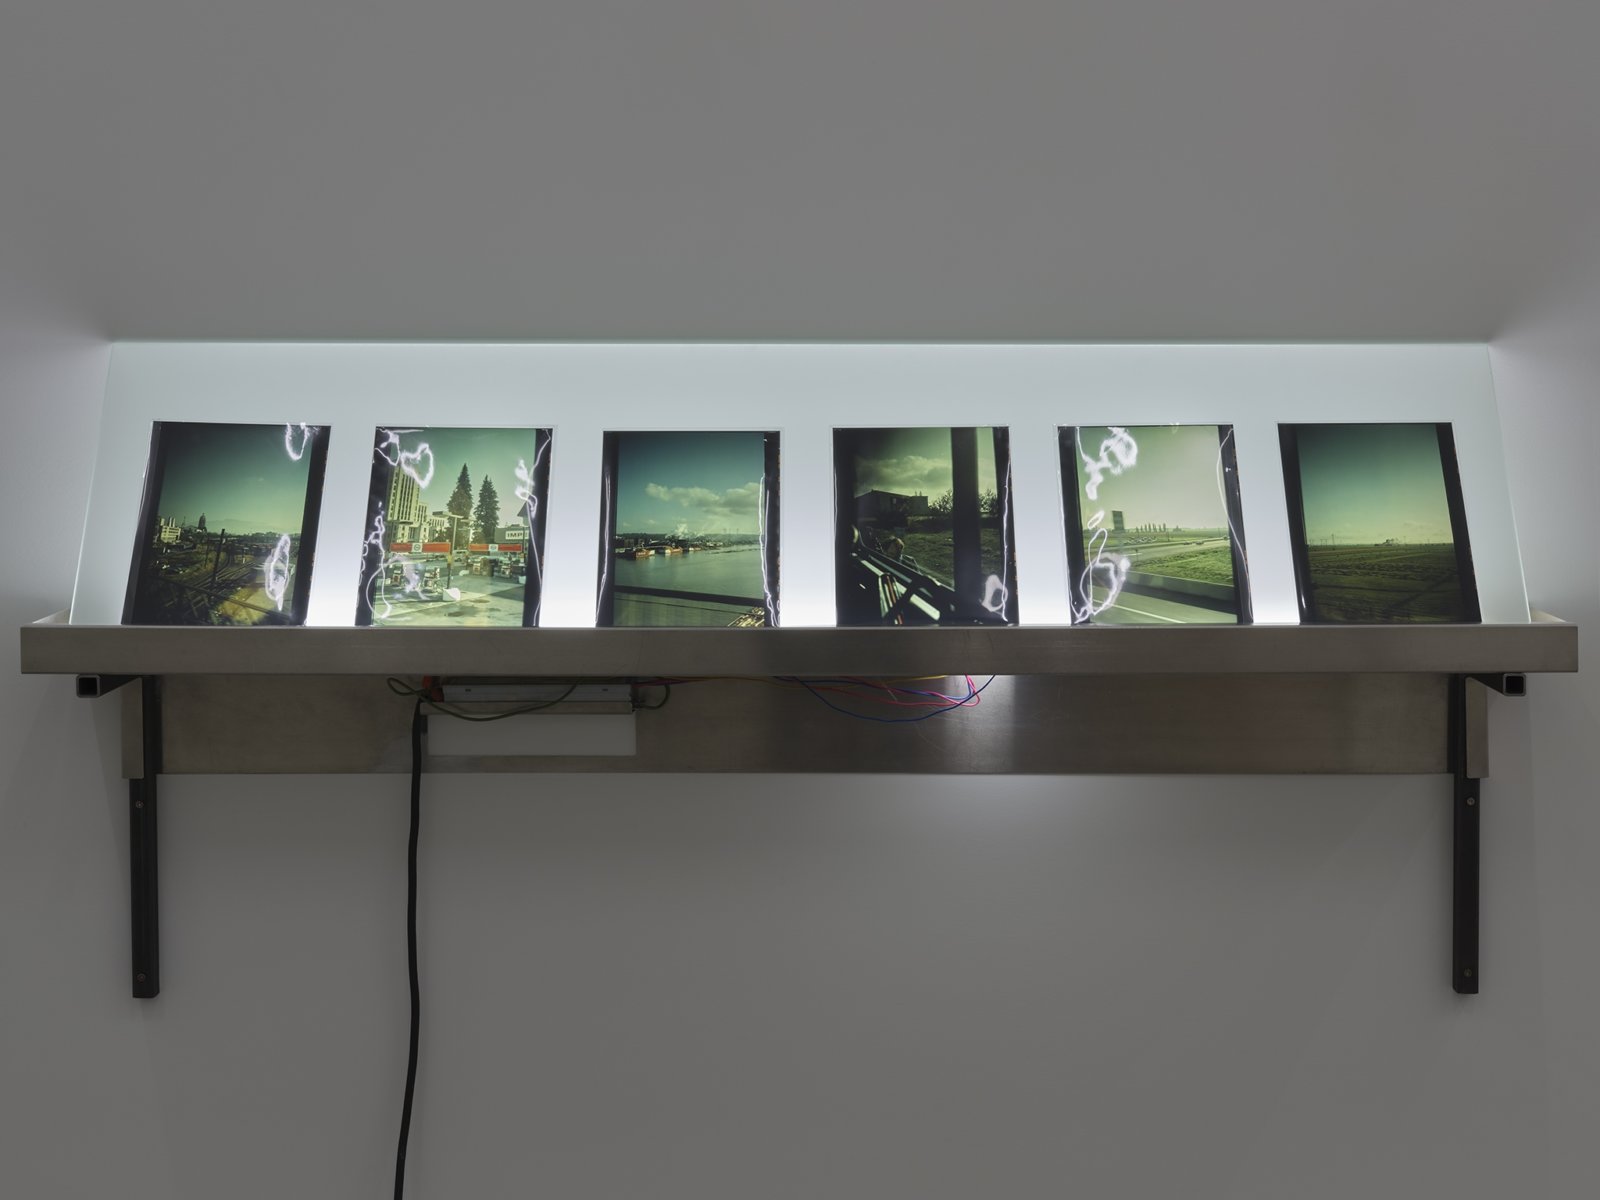 Christina Mackie, Lightbox (The confusion part II), 2012, aluminum, steel, fluorescent lamps, glass, neoprene, photographic transparencies 1973, 30 x 66 x 8 in. (76 x 168 x 21 cm)